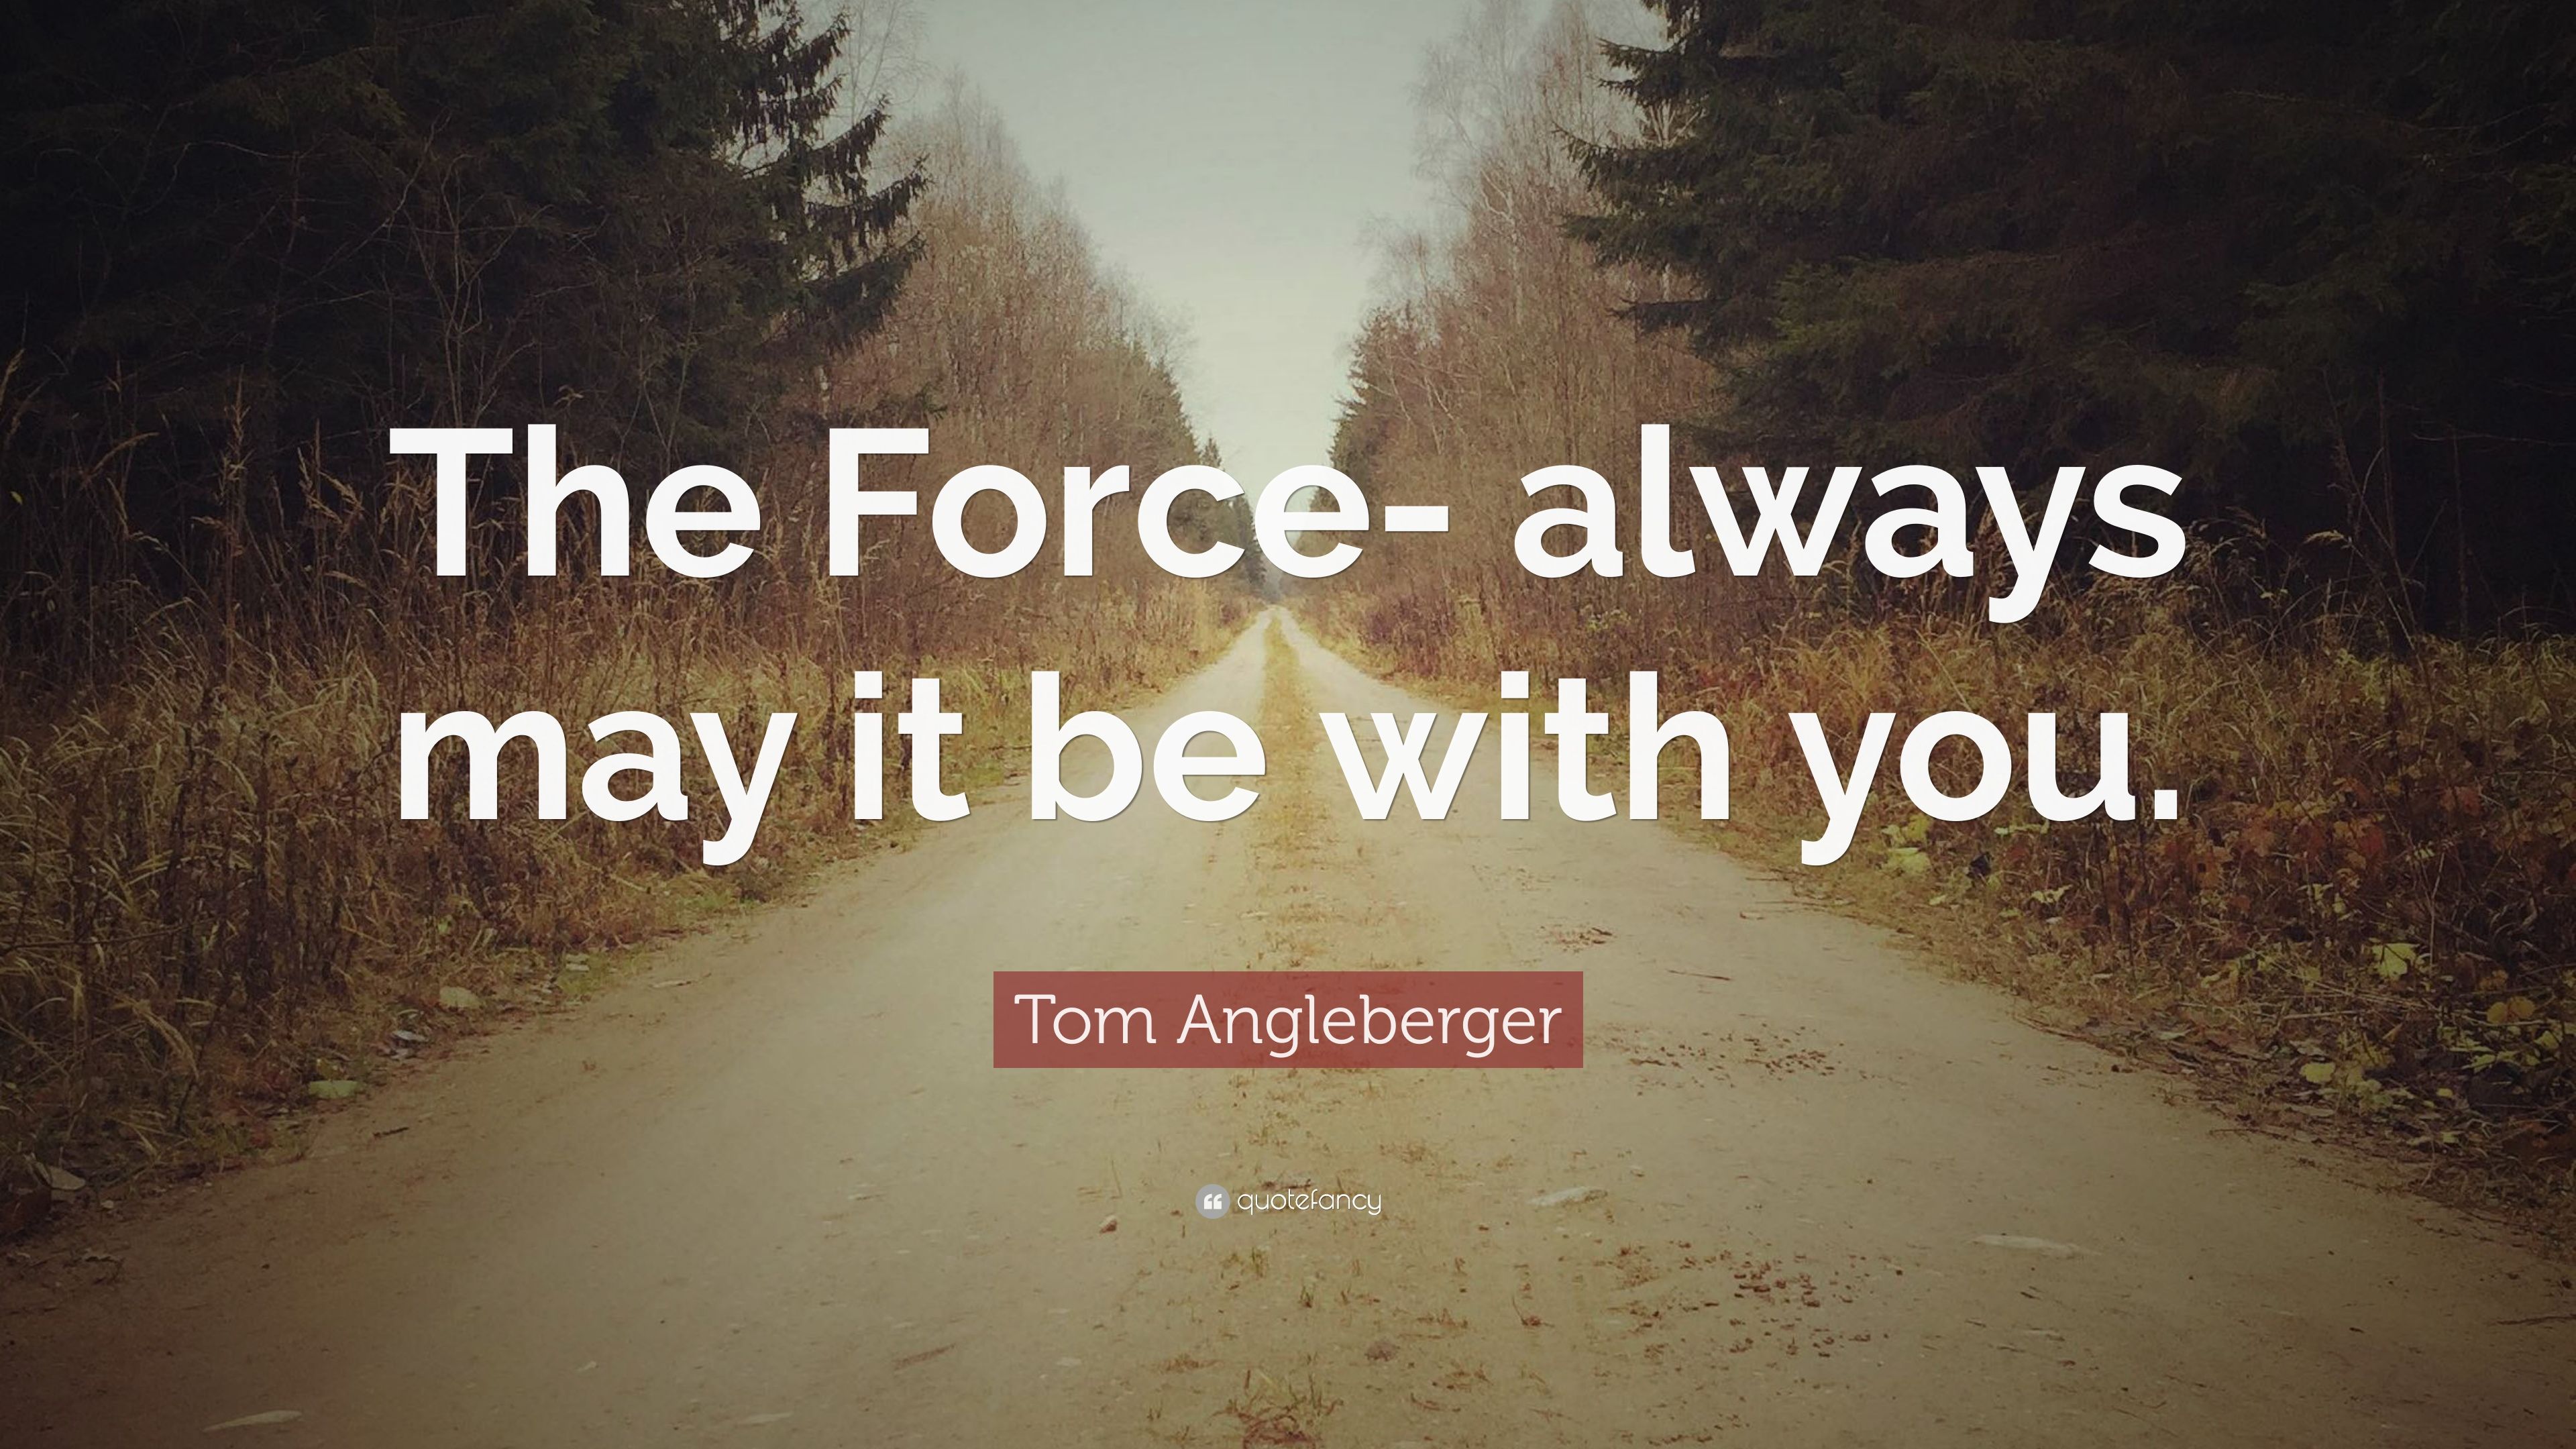 Tom Angleberger Quote: “The Force- always may it be with you.” (7 wallpaper)